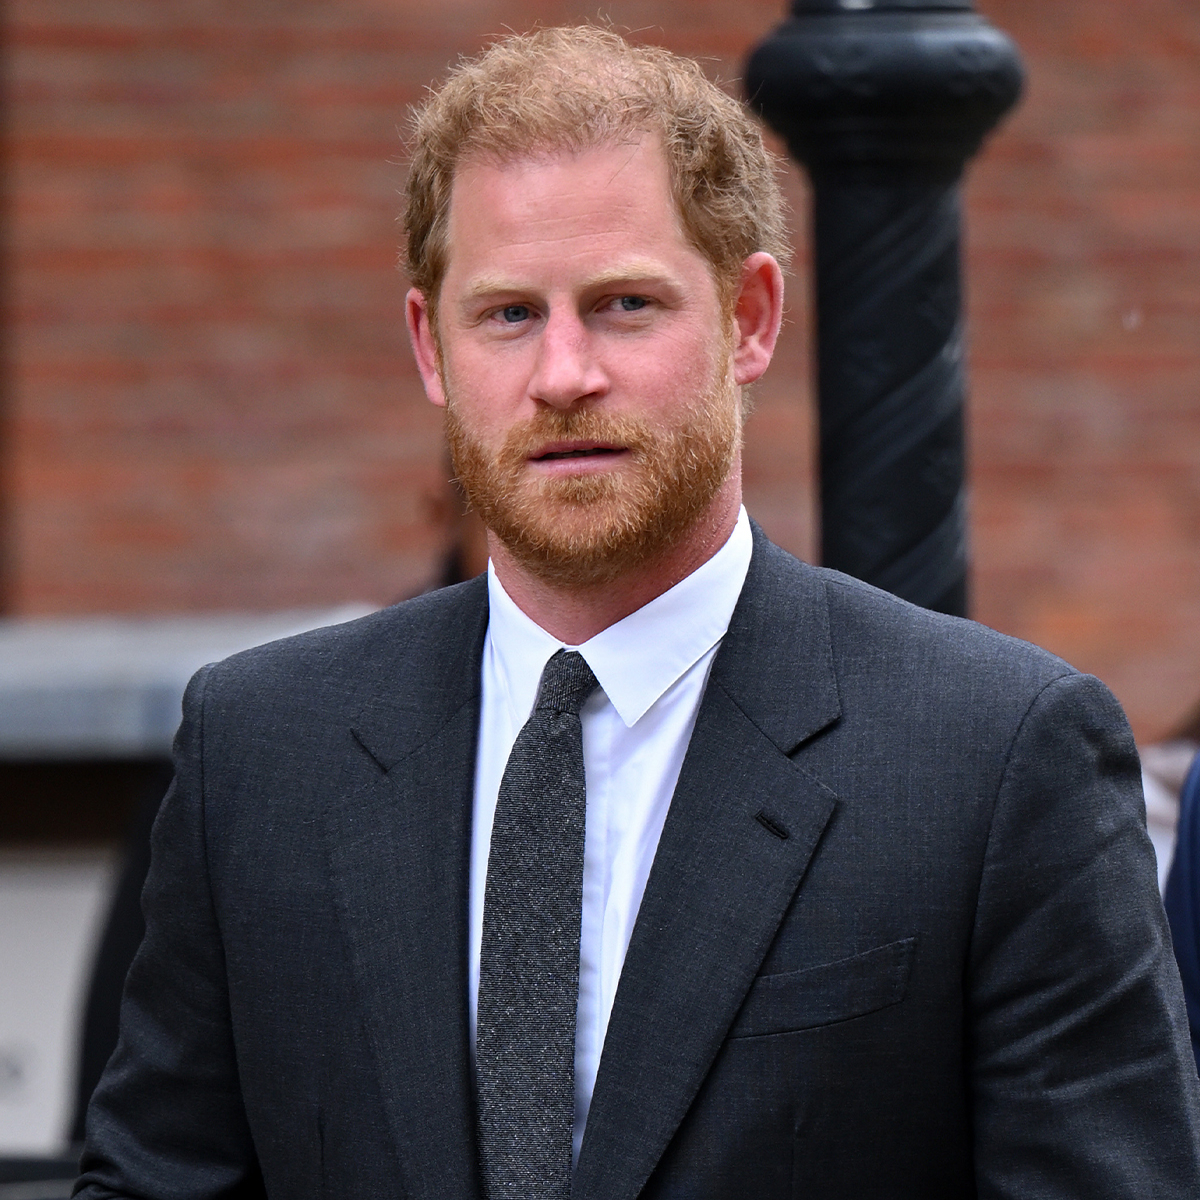 Prince Harry Loses Legal Challenge Over U.K. Security Protection